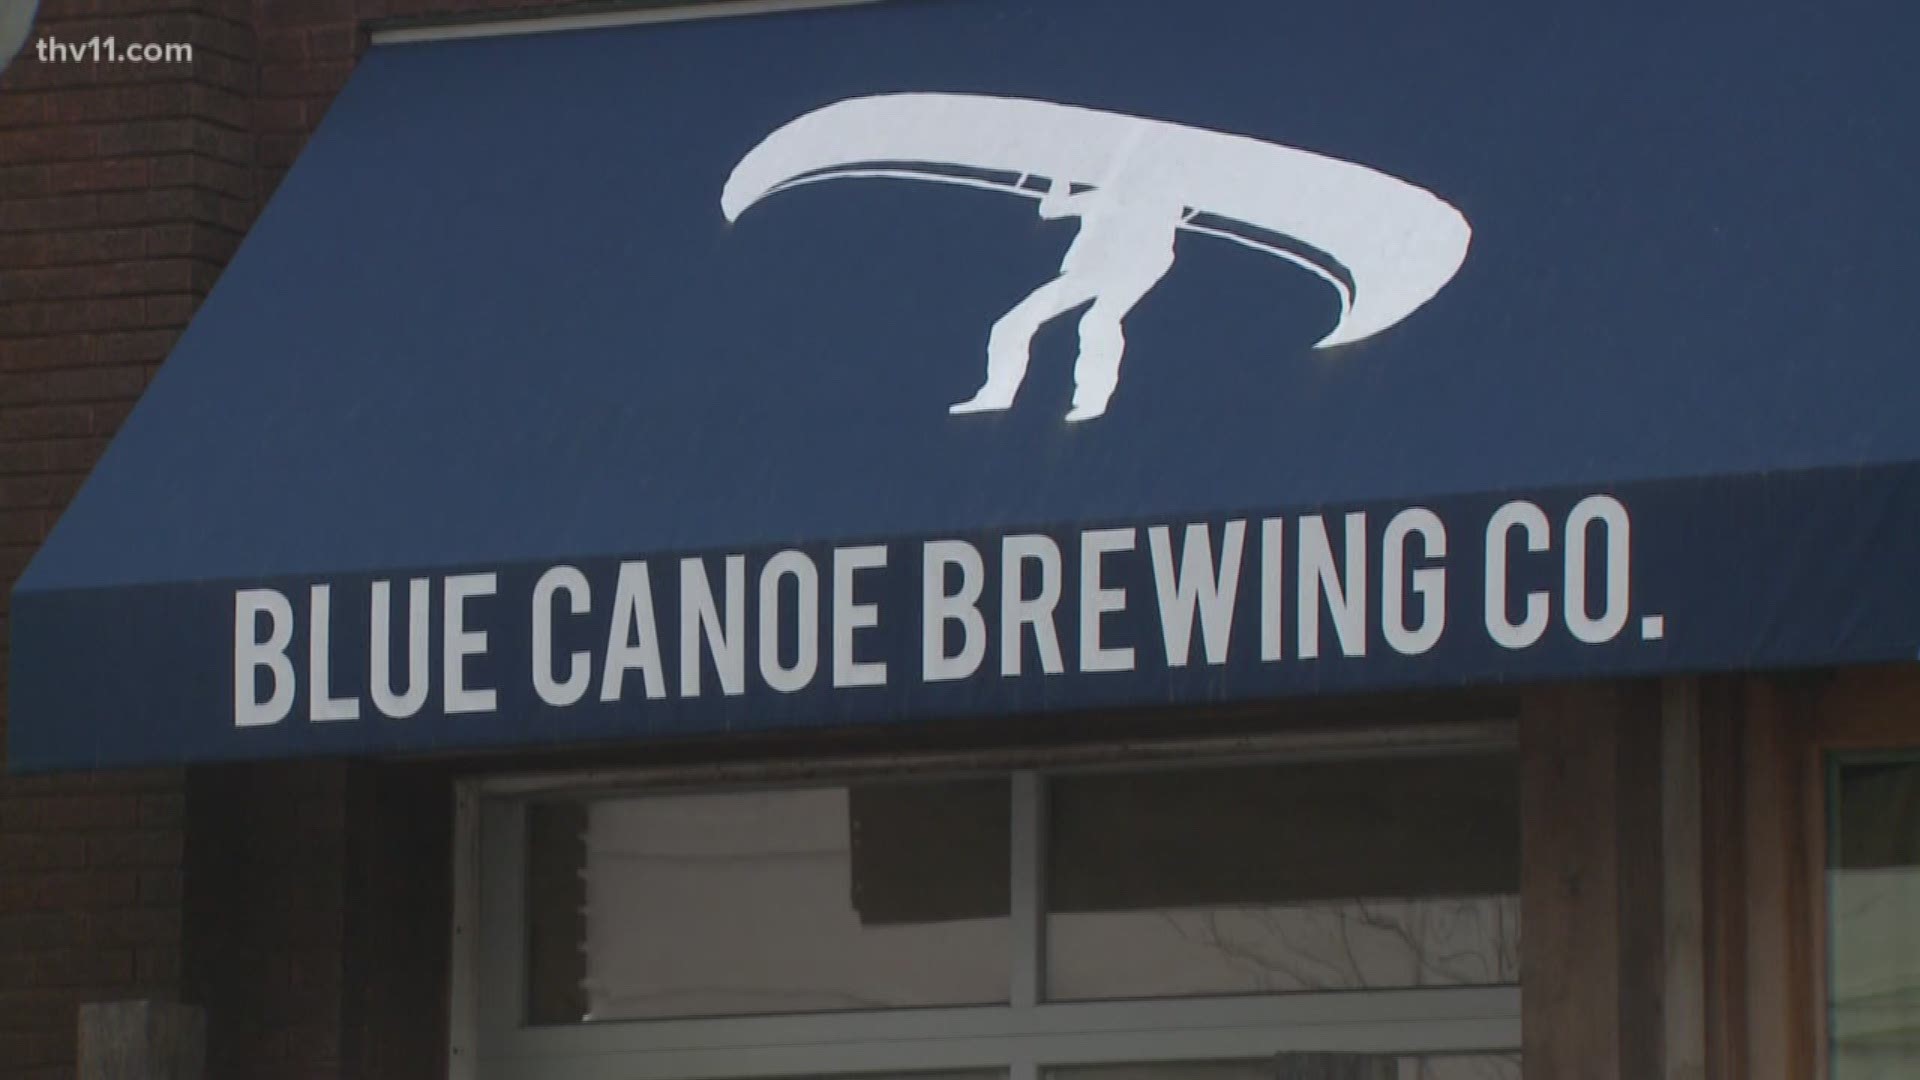 We've learned more about why Little Rock-based "nanobrewery" Blue Canoe Brewing shut its doors.